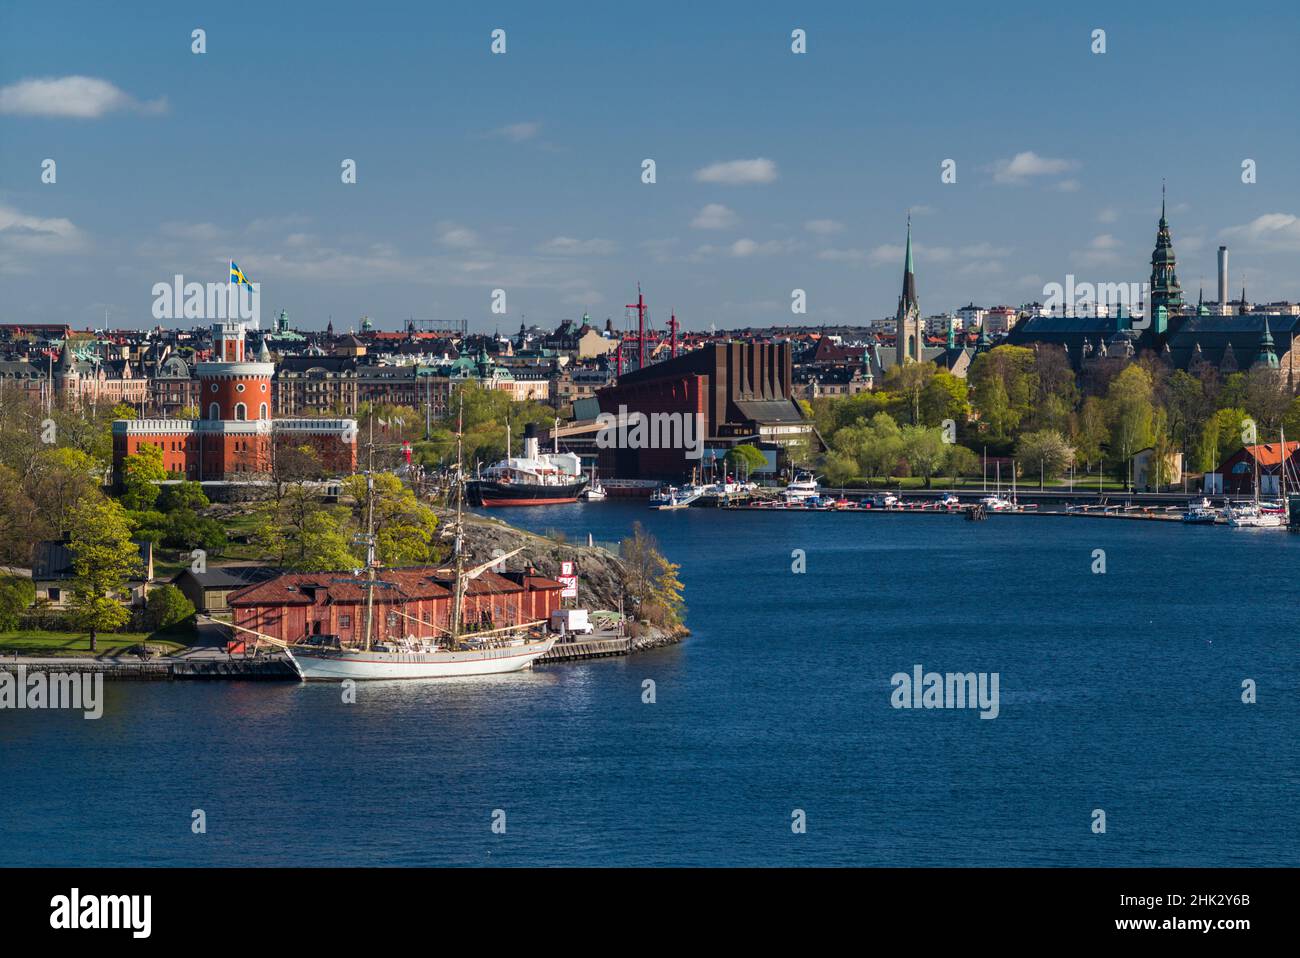 Sweden, Stockholm, Sodermalm neighborhood, view towards the Vasamuseet Vasa ship museum and Stockholm harbor (Editorial Use Only) Stock Photo